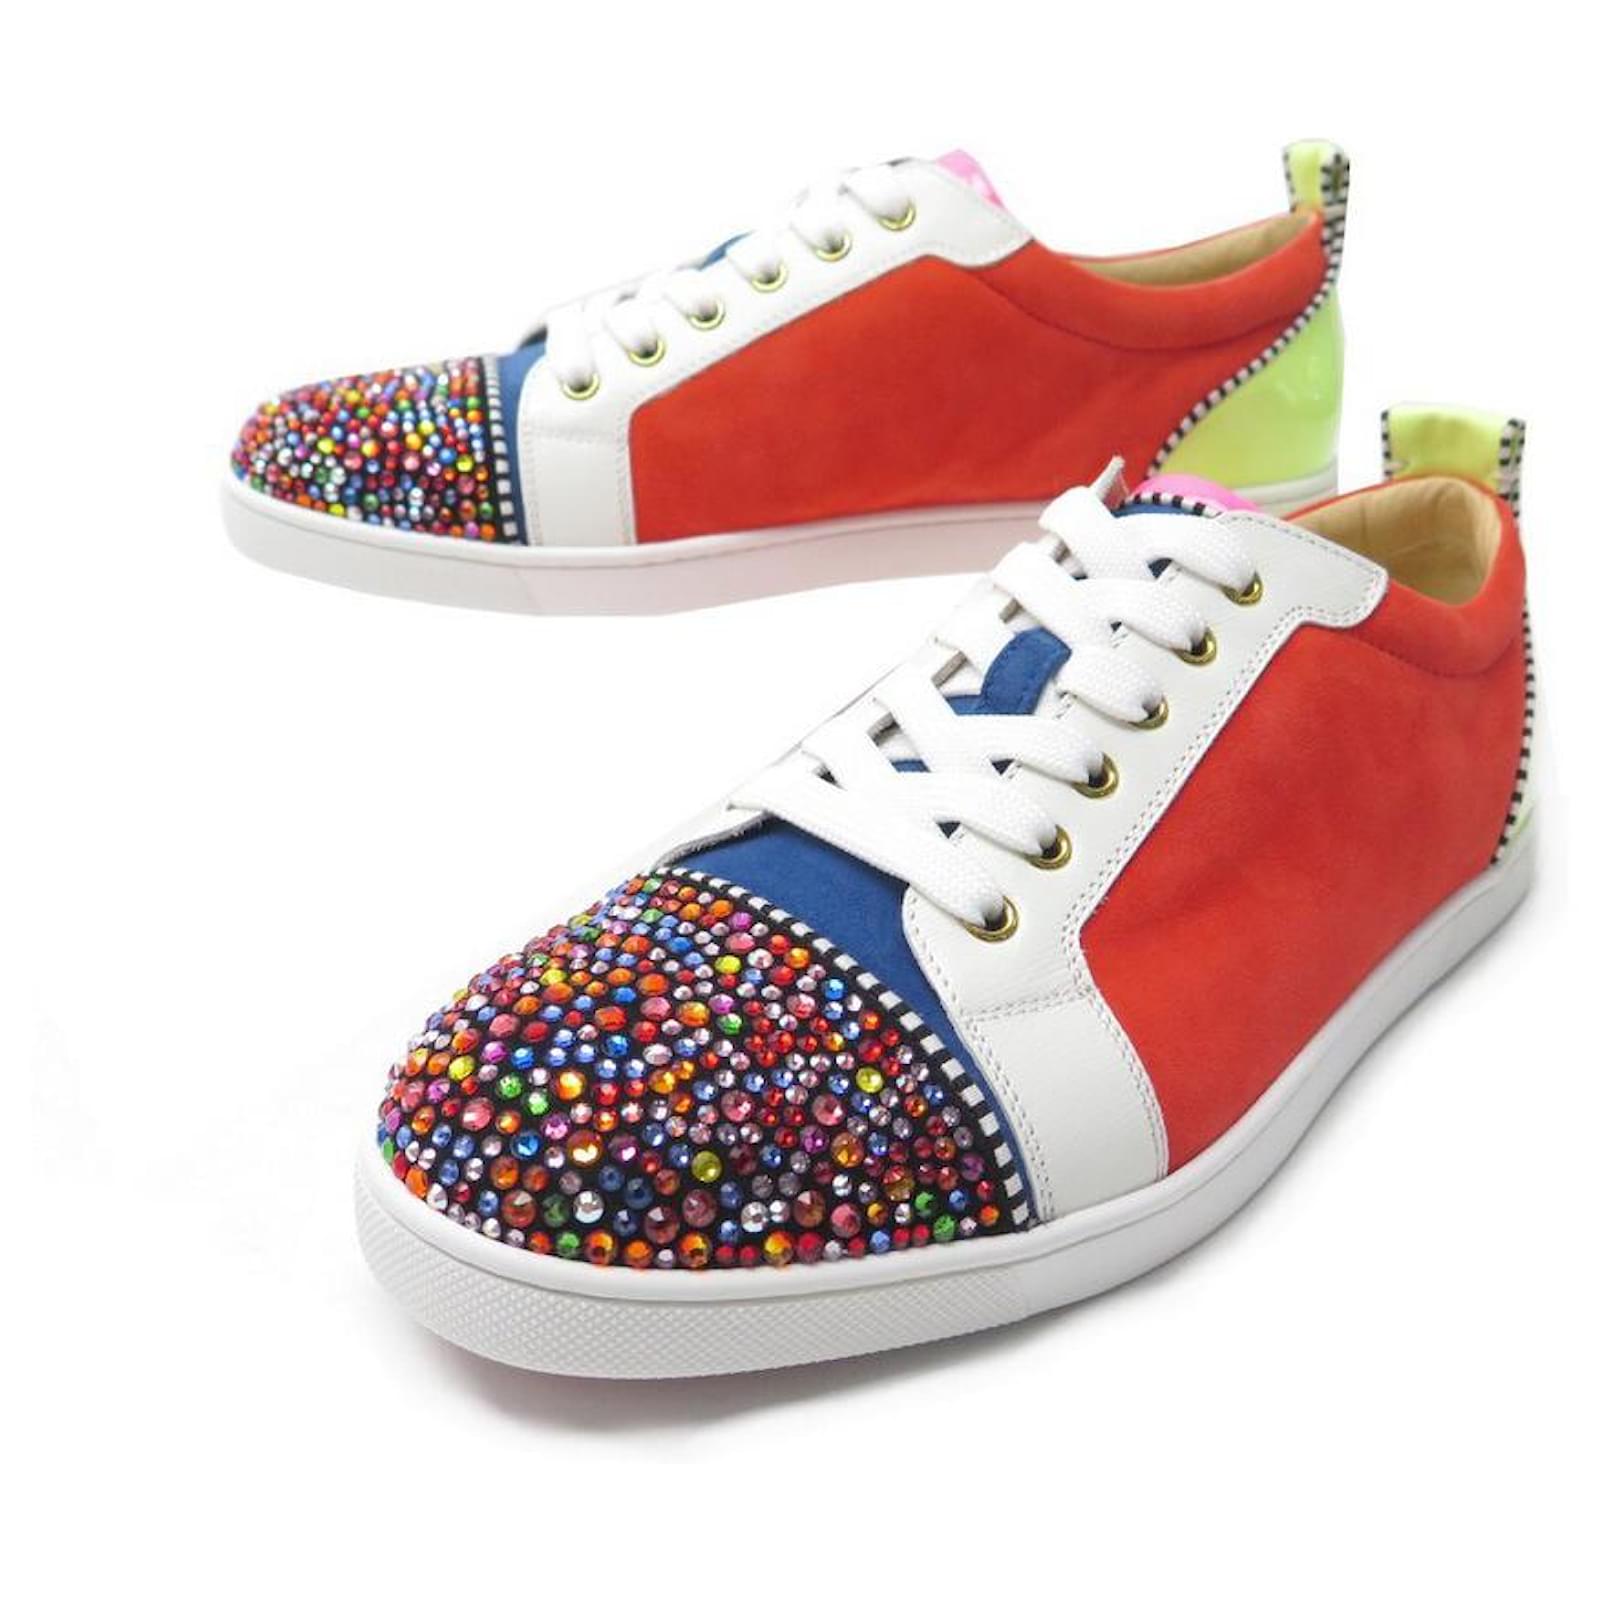 Christian Louboutin Multicolor Patent And Leather Lou Spikes Orlato Sneakers  Size 42.5 Christian Louboutin